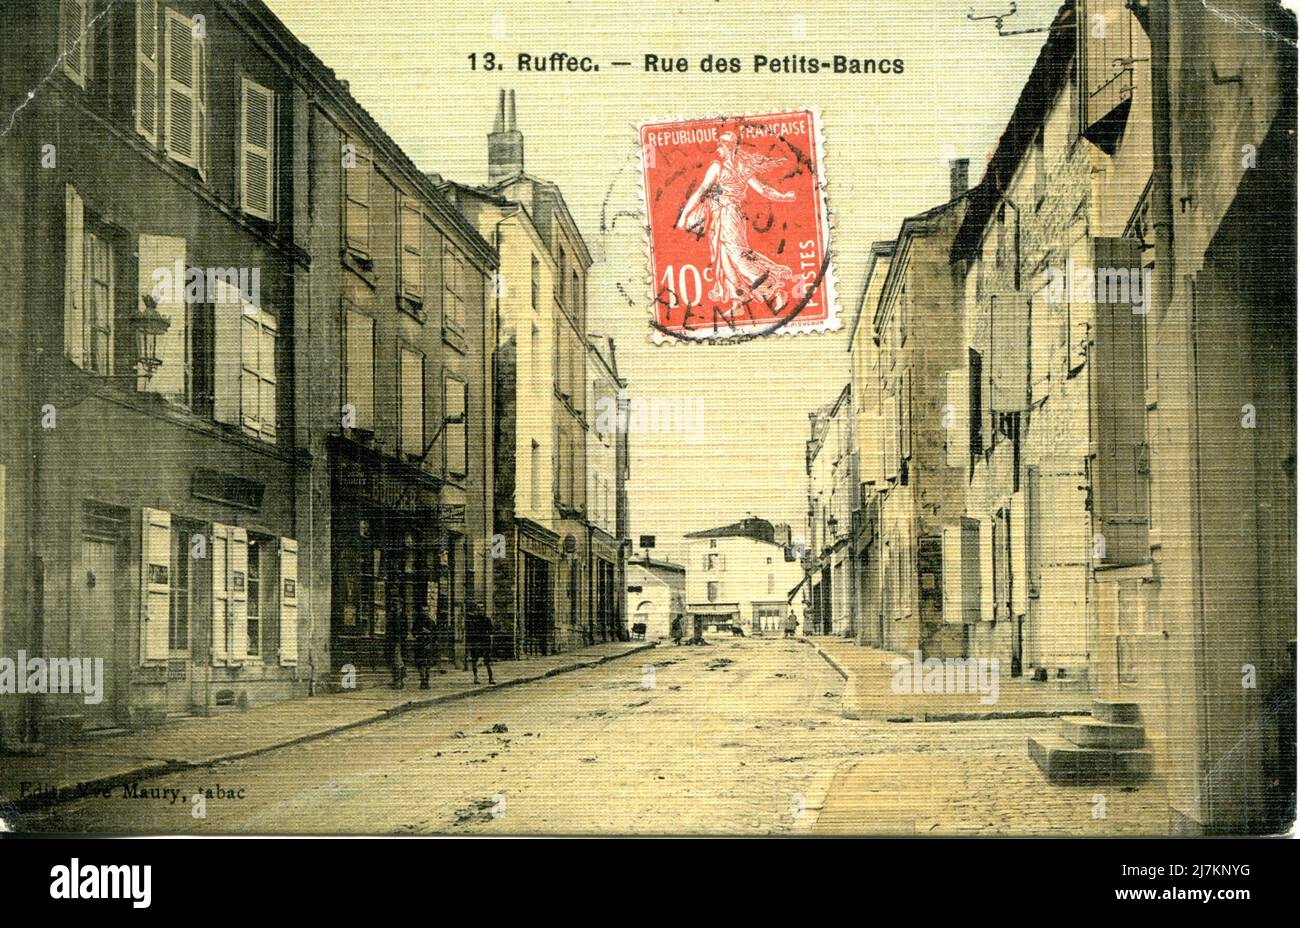 Ruffec Department: 16 - Charente Region: Nouvelle-Aquitaine (formerly Poitou-Charentes) Vintage postcard, late 19th - early 20th century Stock Photo